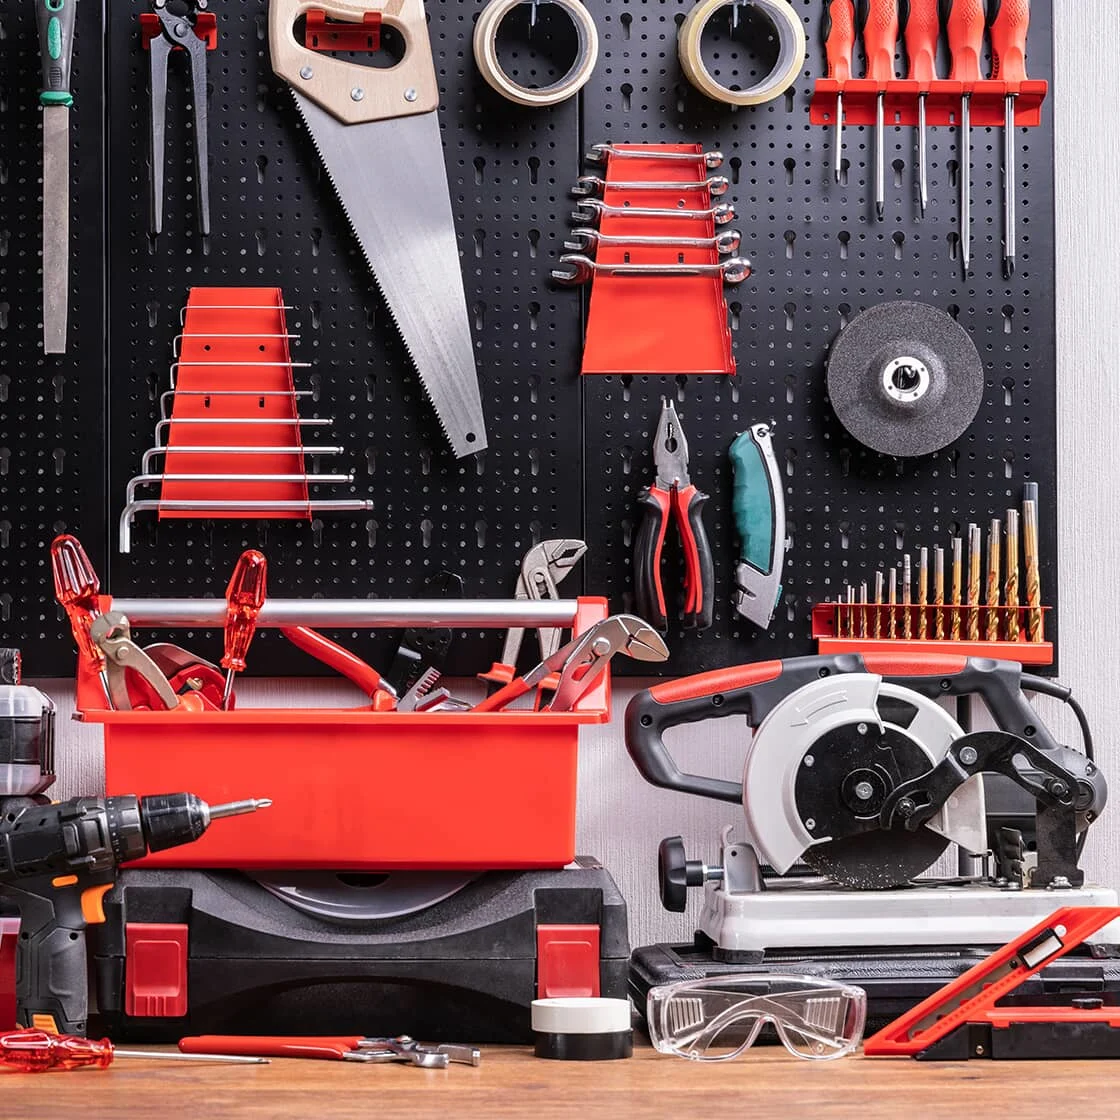 Must-have tools for every homeowner 